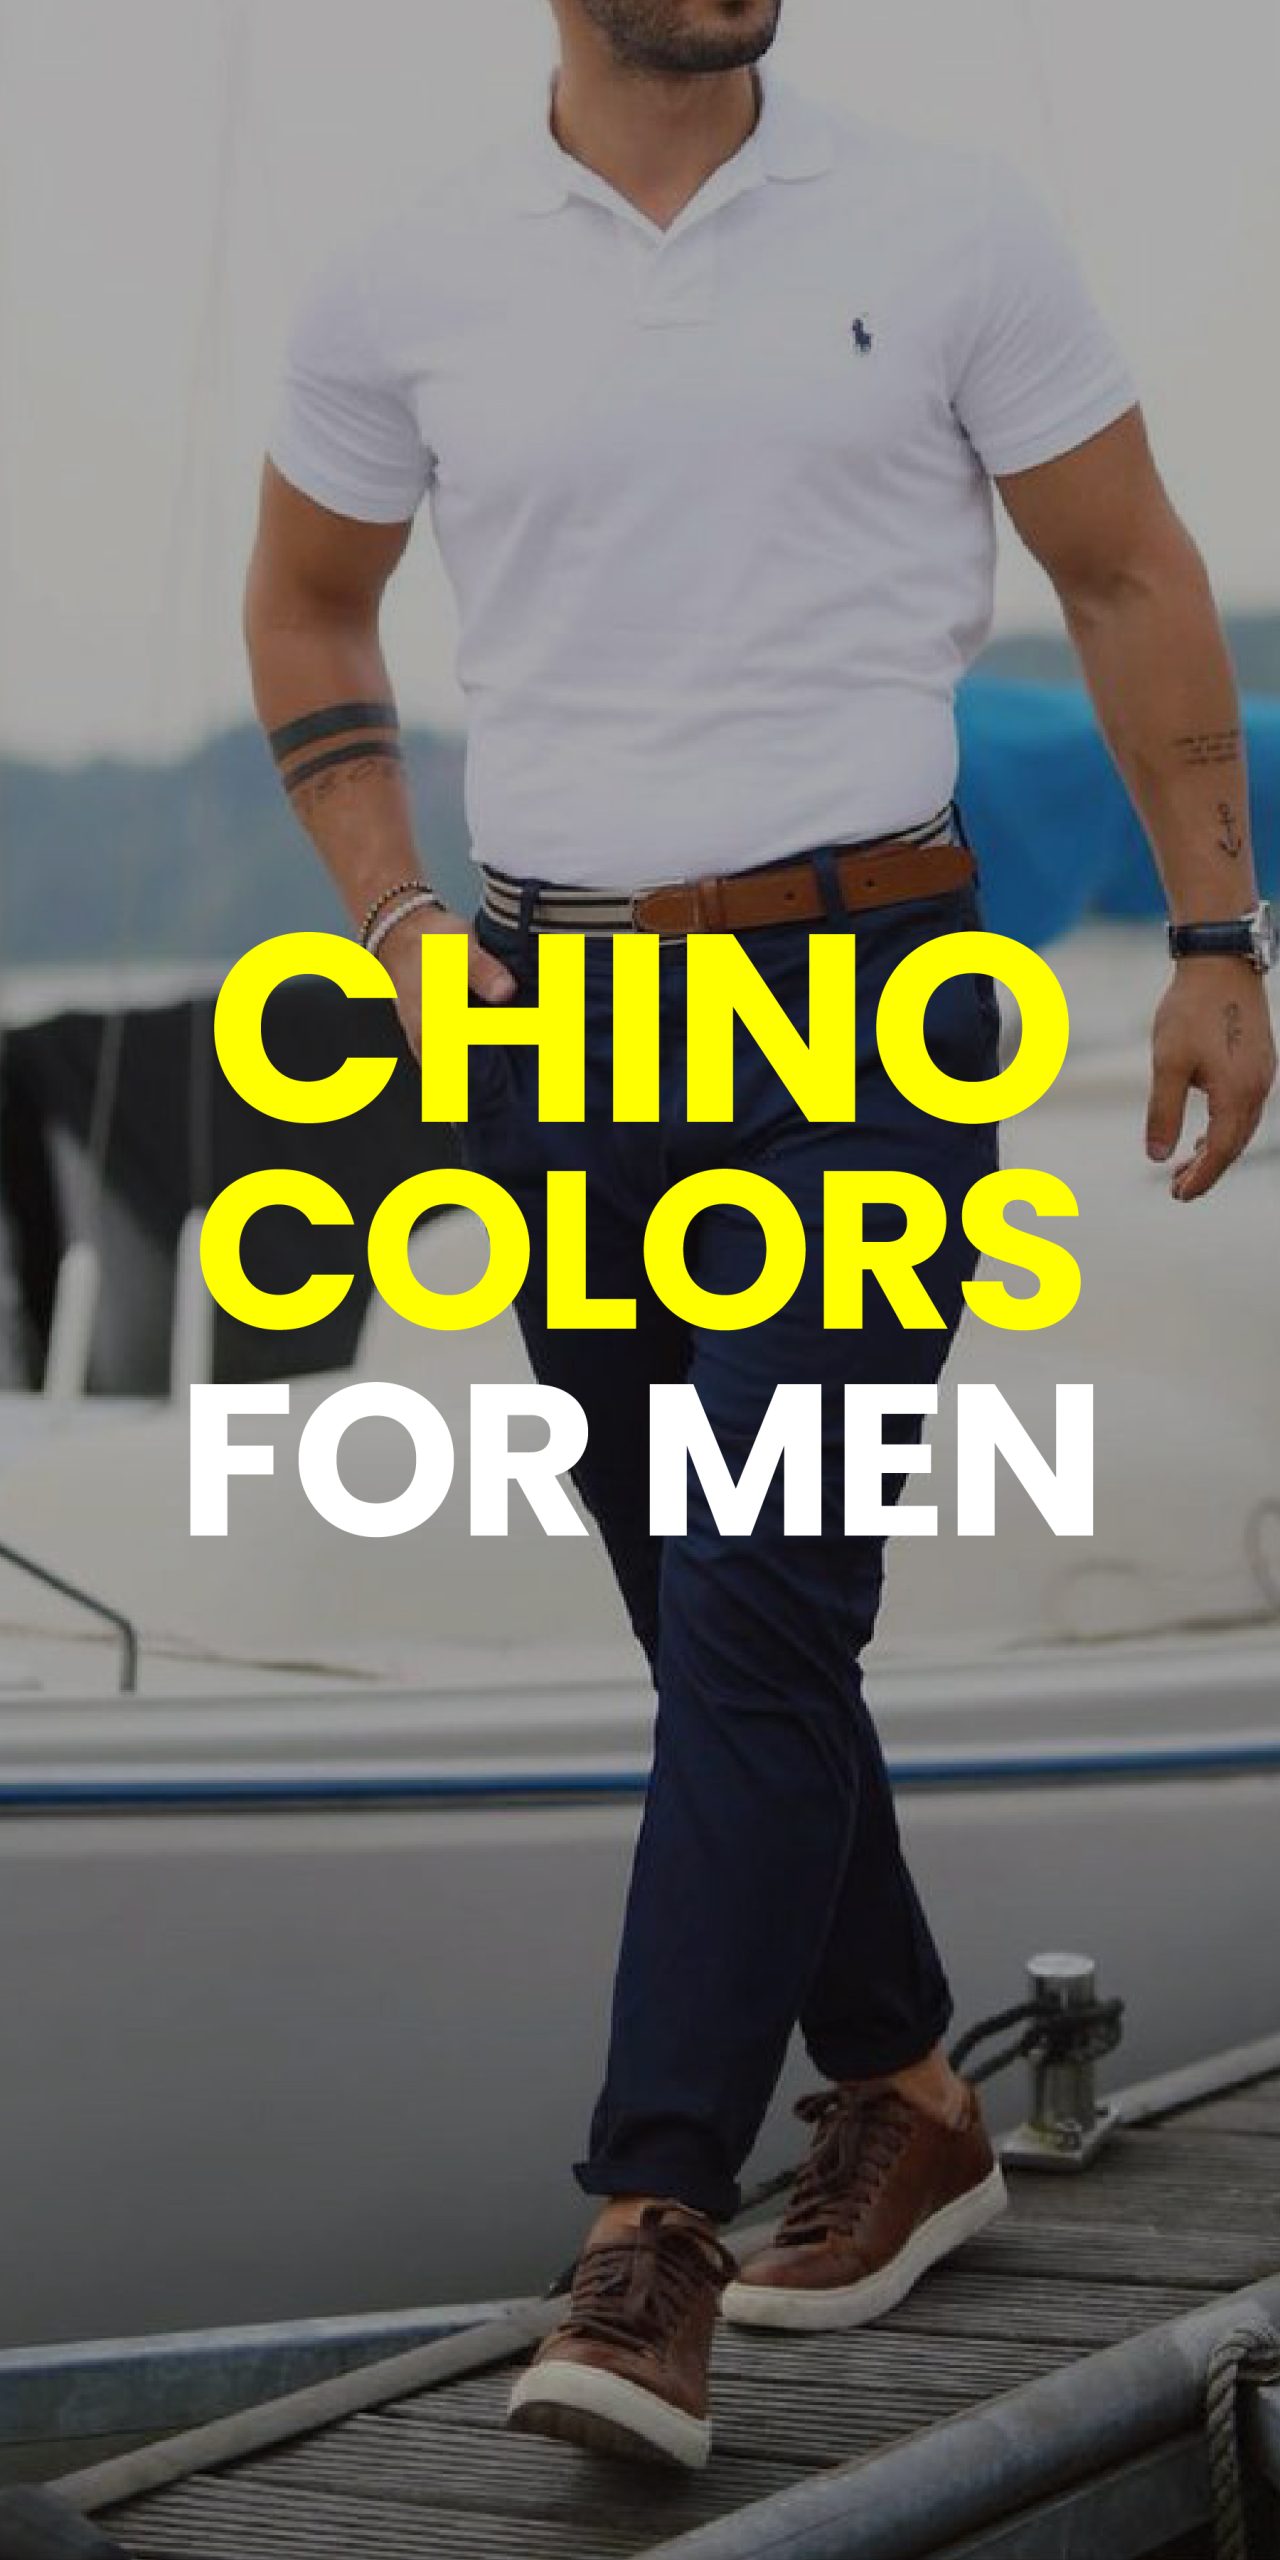 CHINO COLORS FOR MEN